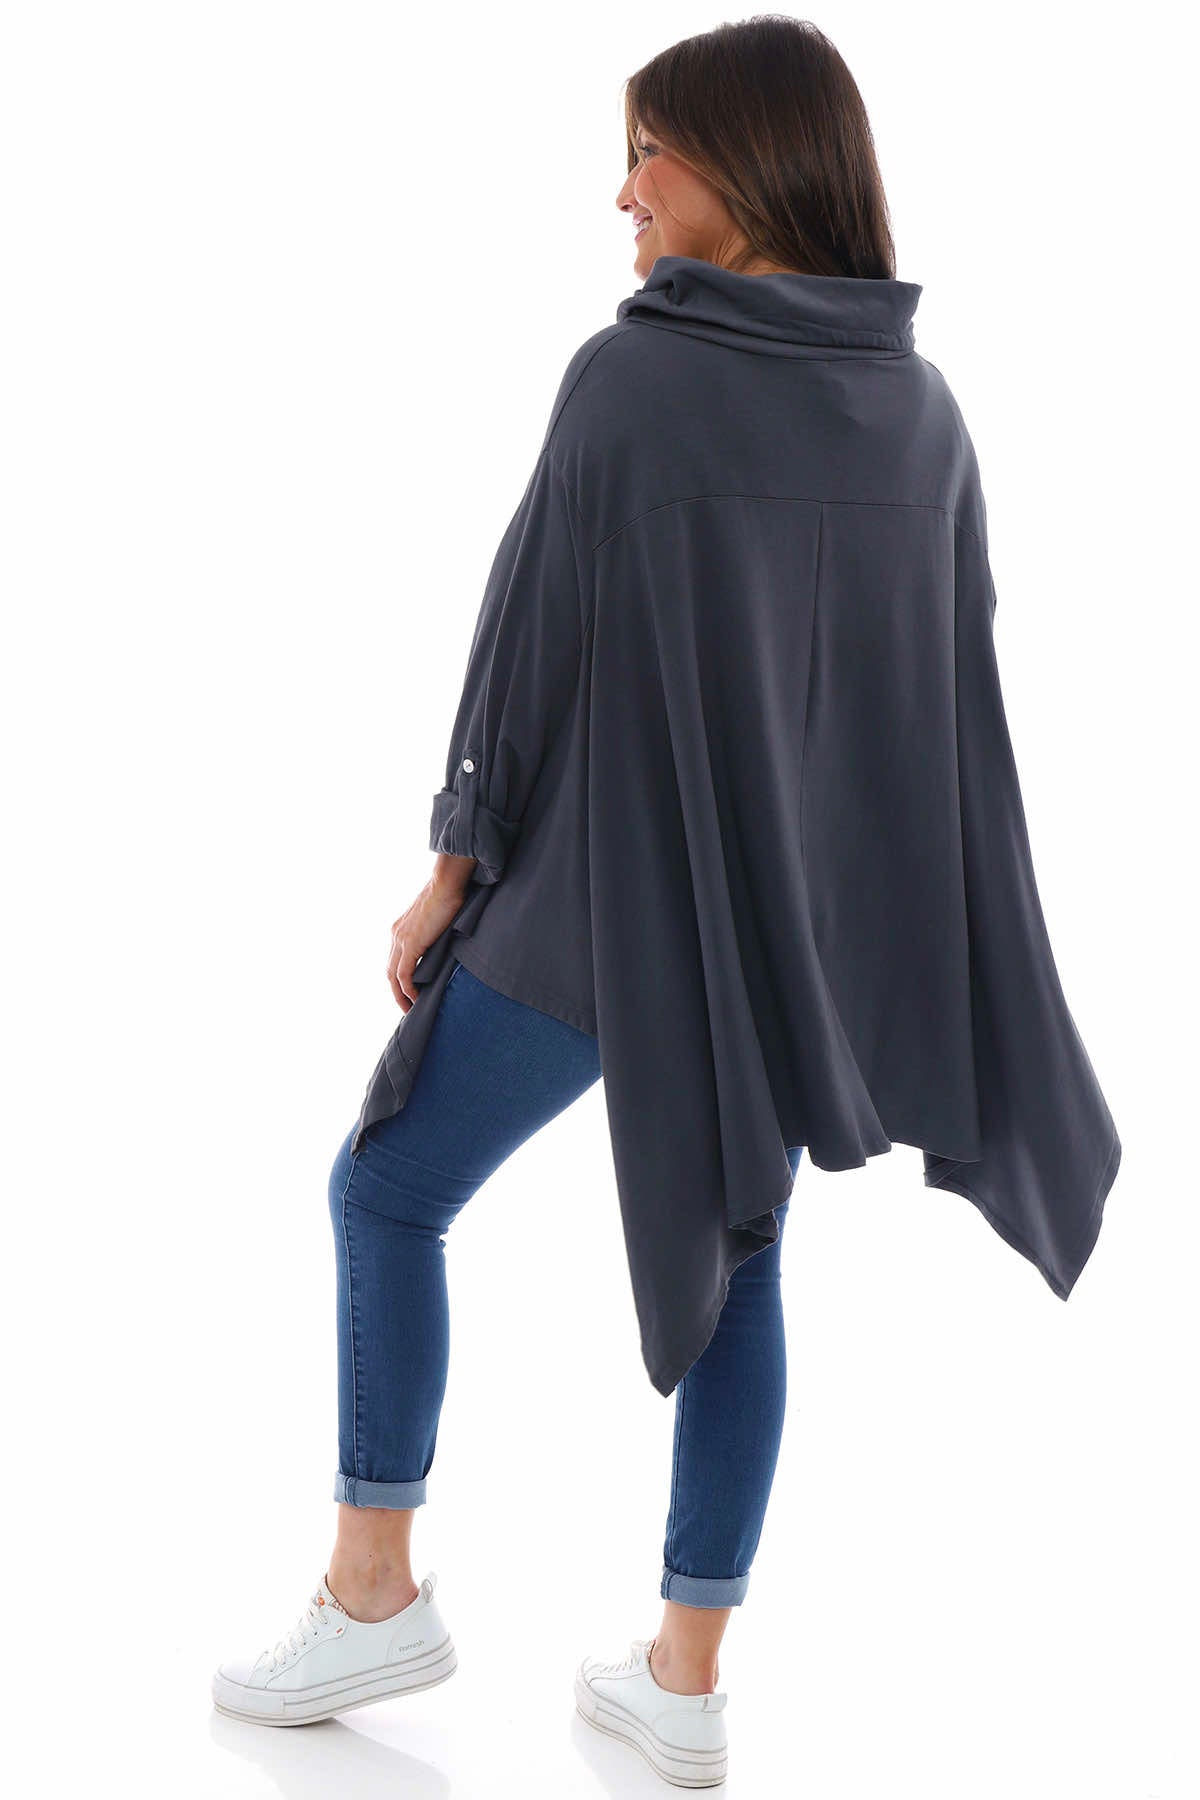 Stradella Cowl Neck Jersey Top Charcoal